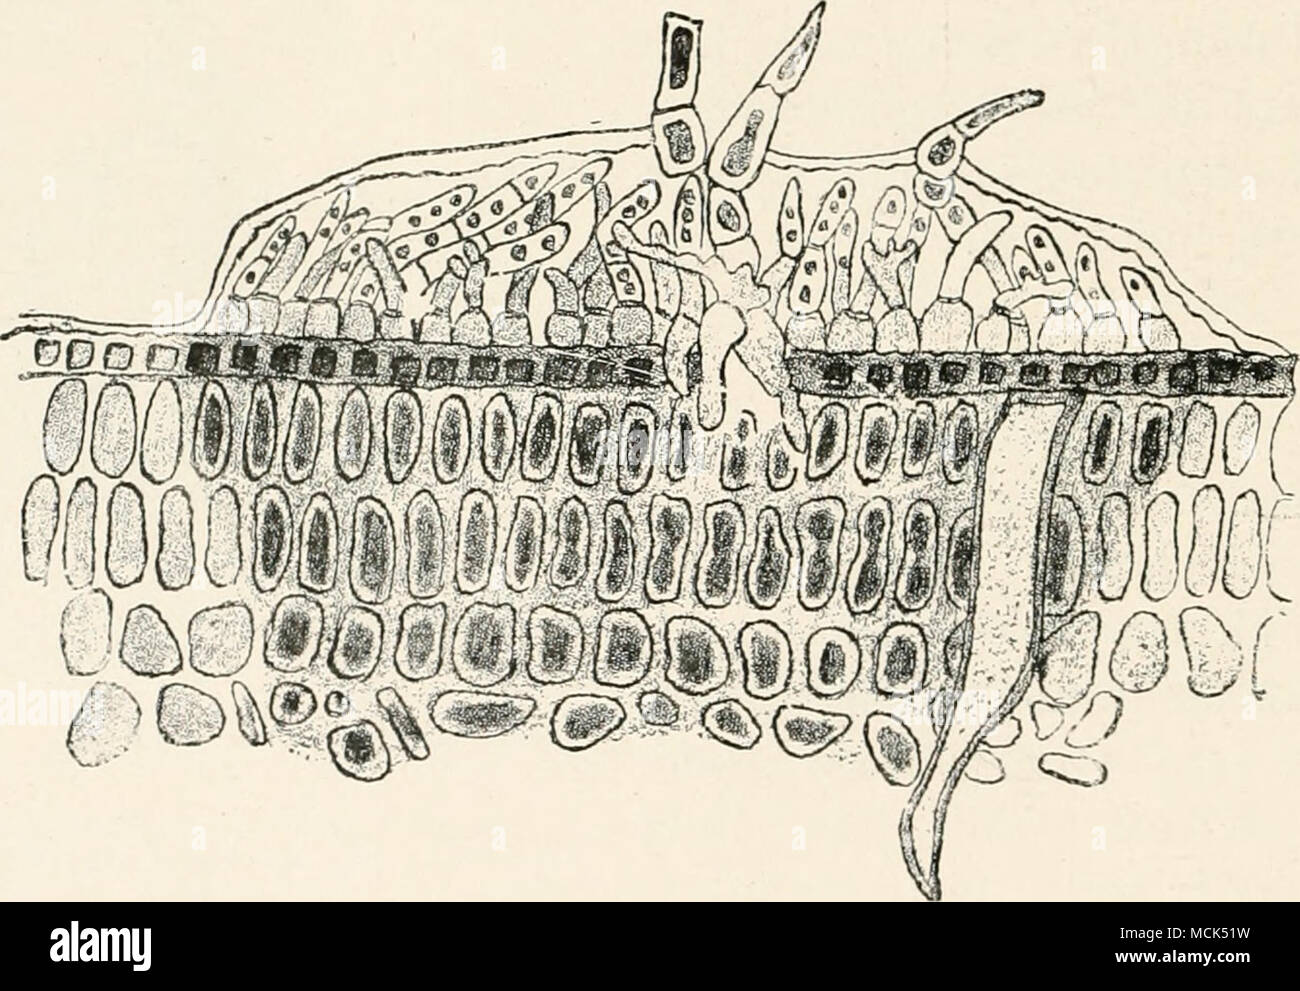 . Fig. ZW.—Cephaleuros Mycoidea. Section through part of an attacked leaf of Camellia. The epidermal layer has been ruptured, and haustoria from the algal disc penetrate to the tissues. The dark-shaded portion is that killed by the alga. (After Cunningham.) the older ones ; in addition, sporangial structures are also developed and give off biciliate swarm-spores. The discs form a kind of cuticle which becomes completely fused with that of the leaves. ^ Karsten, Annal. diijardin. hotan. de Buitenzorg, Vol. x., 1891. -Cunningham, Trana. of Linnean Soc. of London, 1880; H. M. Ward [idem), 1884. Stock Photo